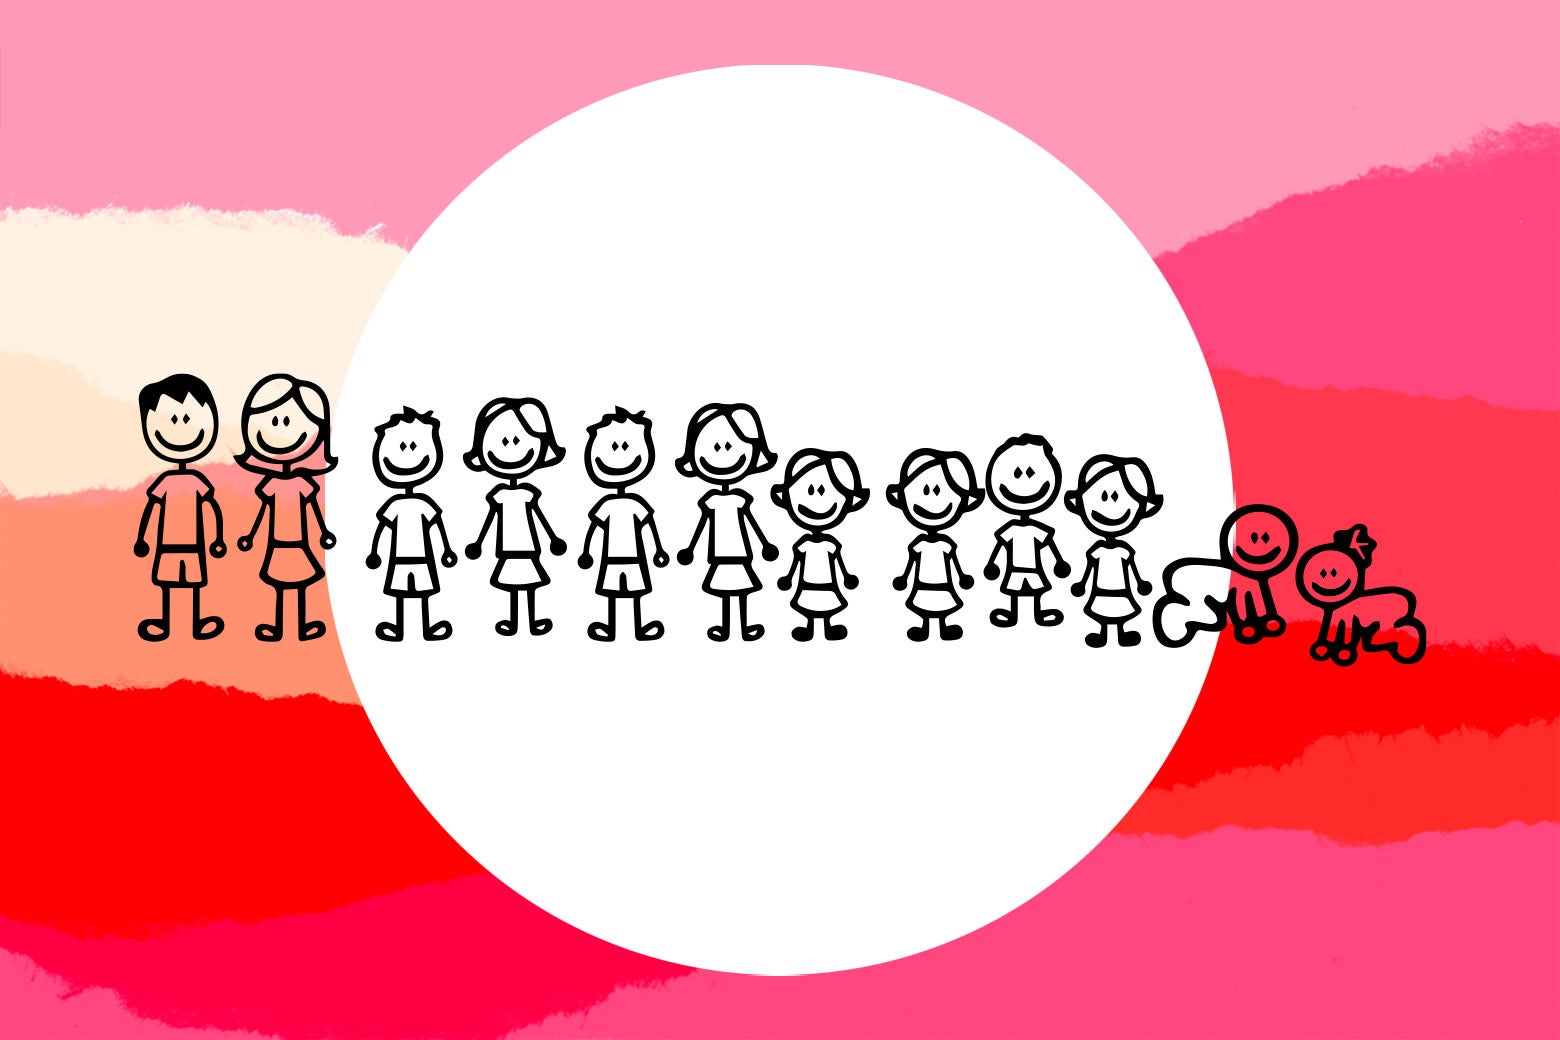 An illustration of a mother and father with 10 kids.